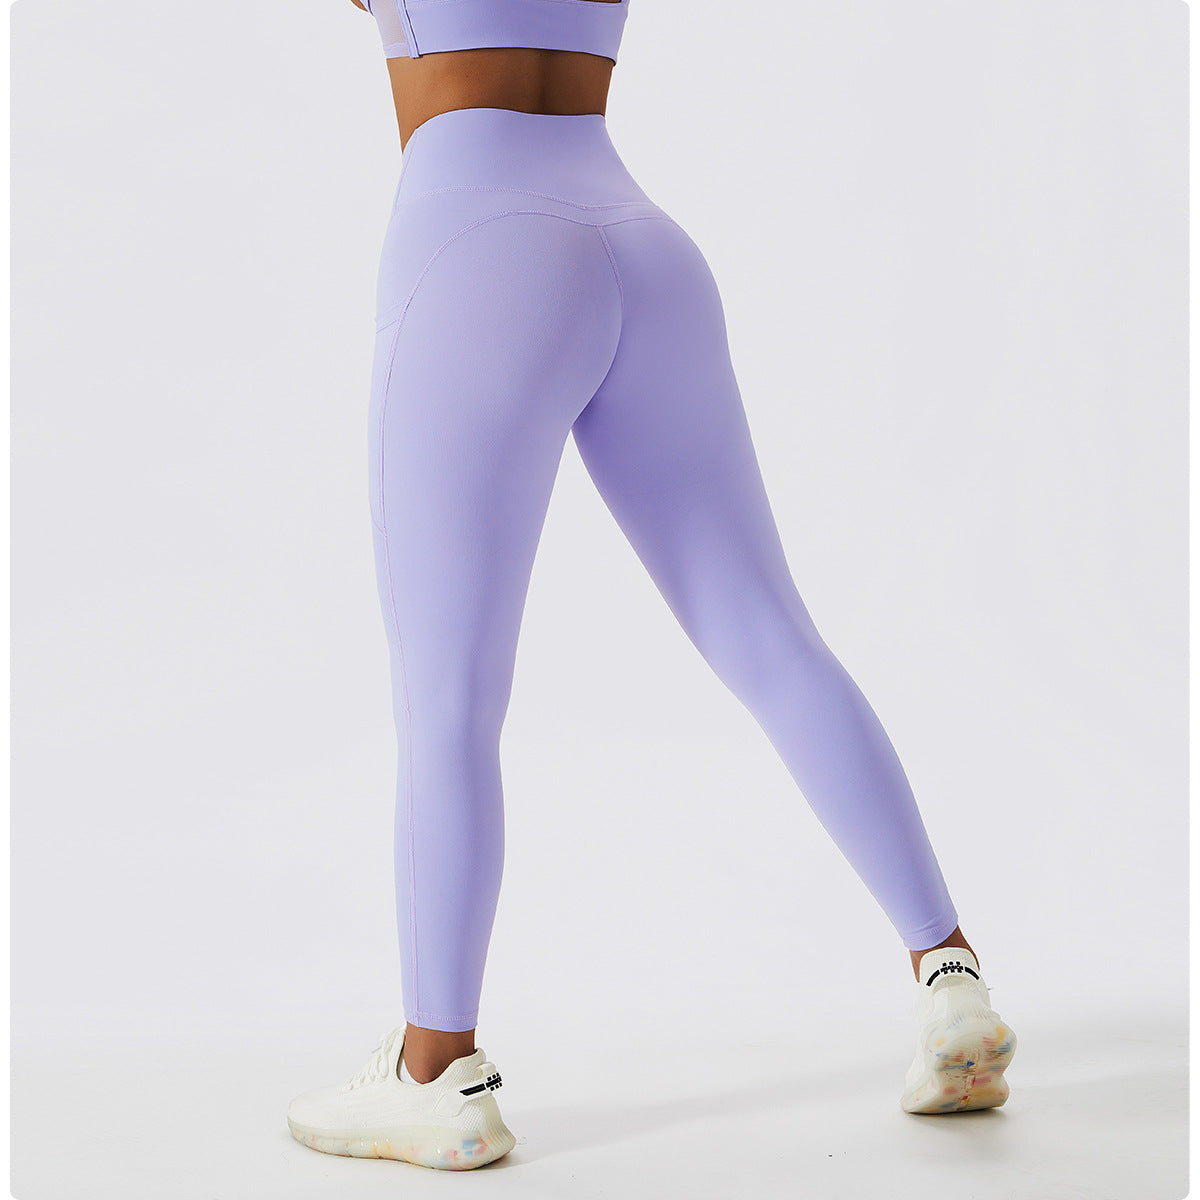 Breathable and quick-drying nude legging